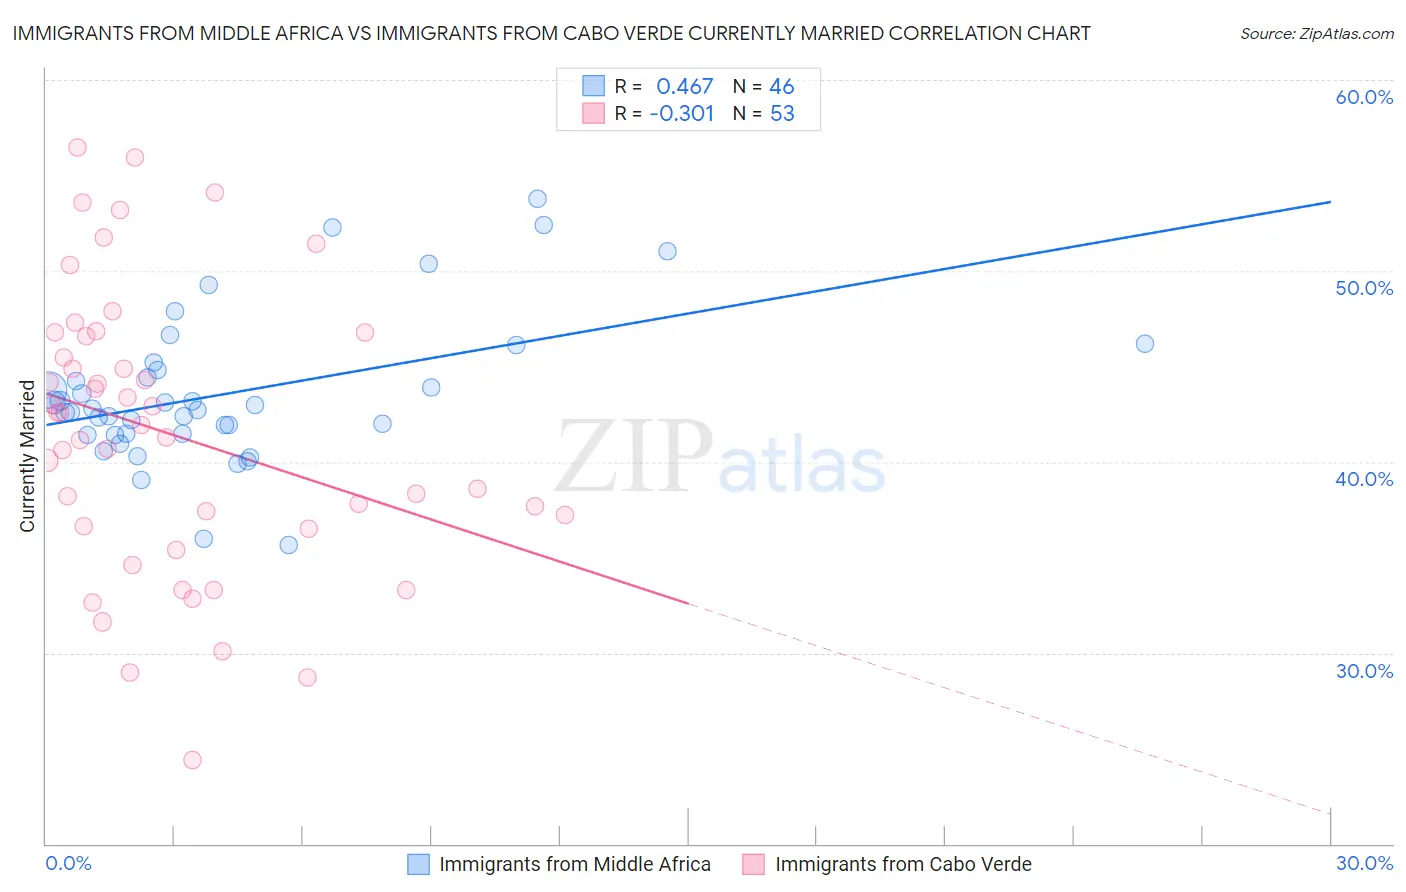 Immigrants from Middle Africa vs Immigrants from Cabo Verde Currently Married